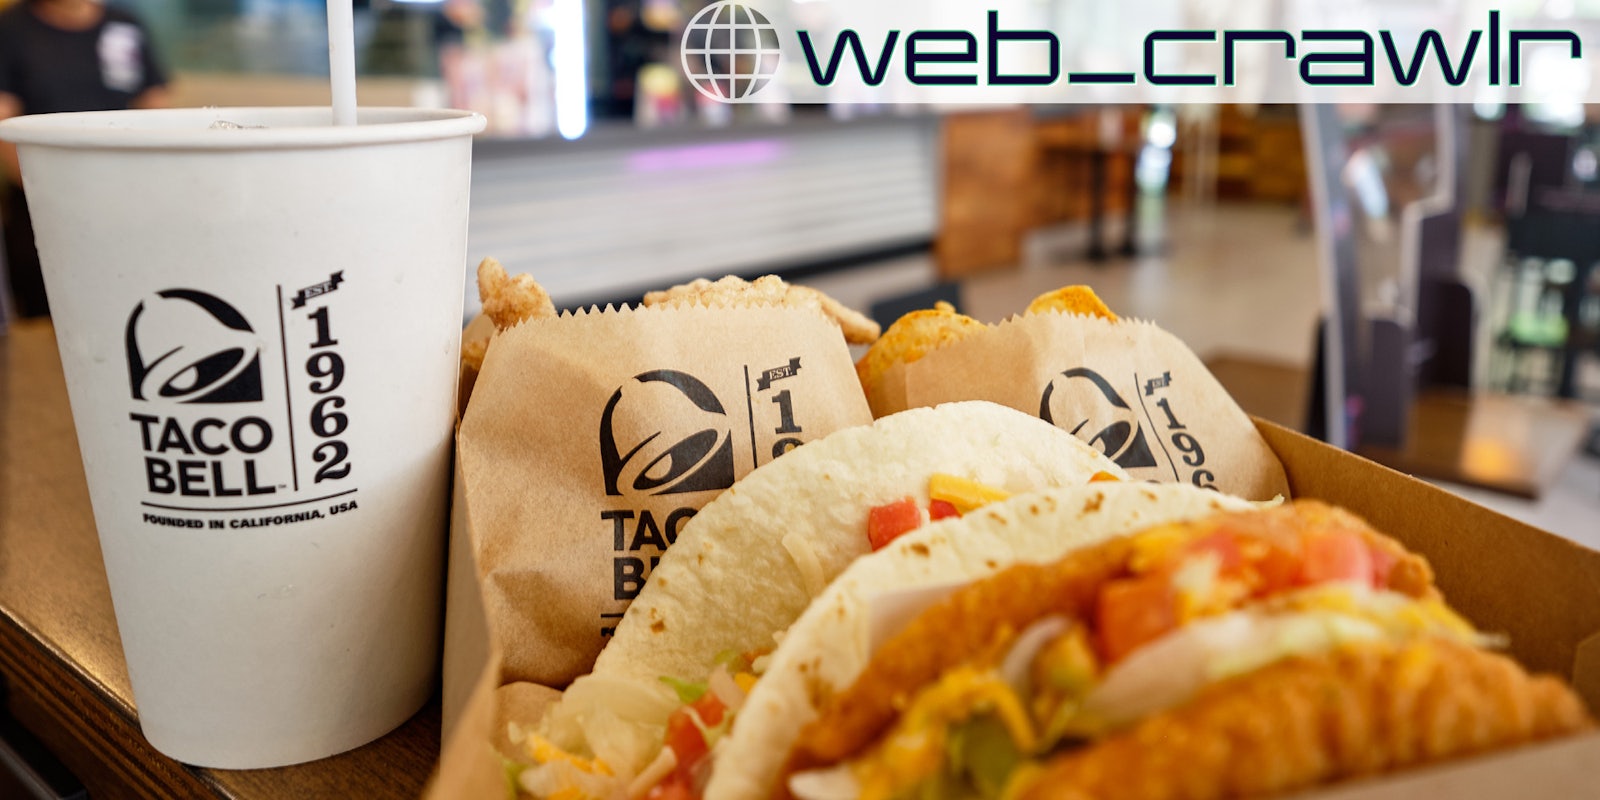 A Taco Bell meal on a table. The Daily Dot newsletter web_crawlr logo is in the top right corner.